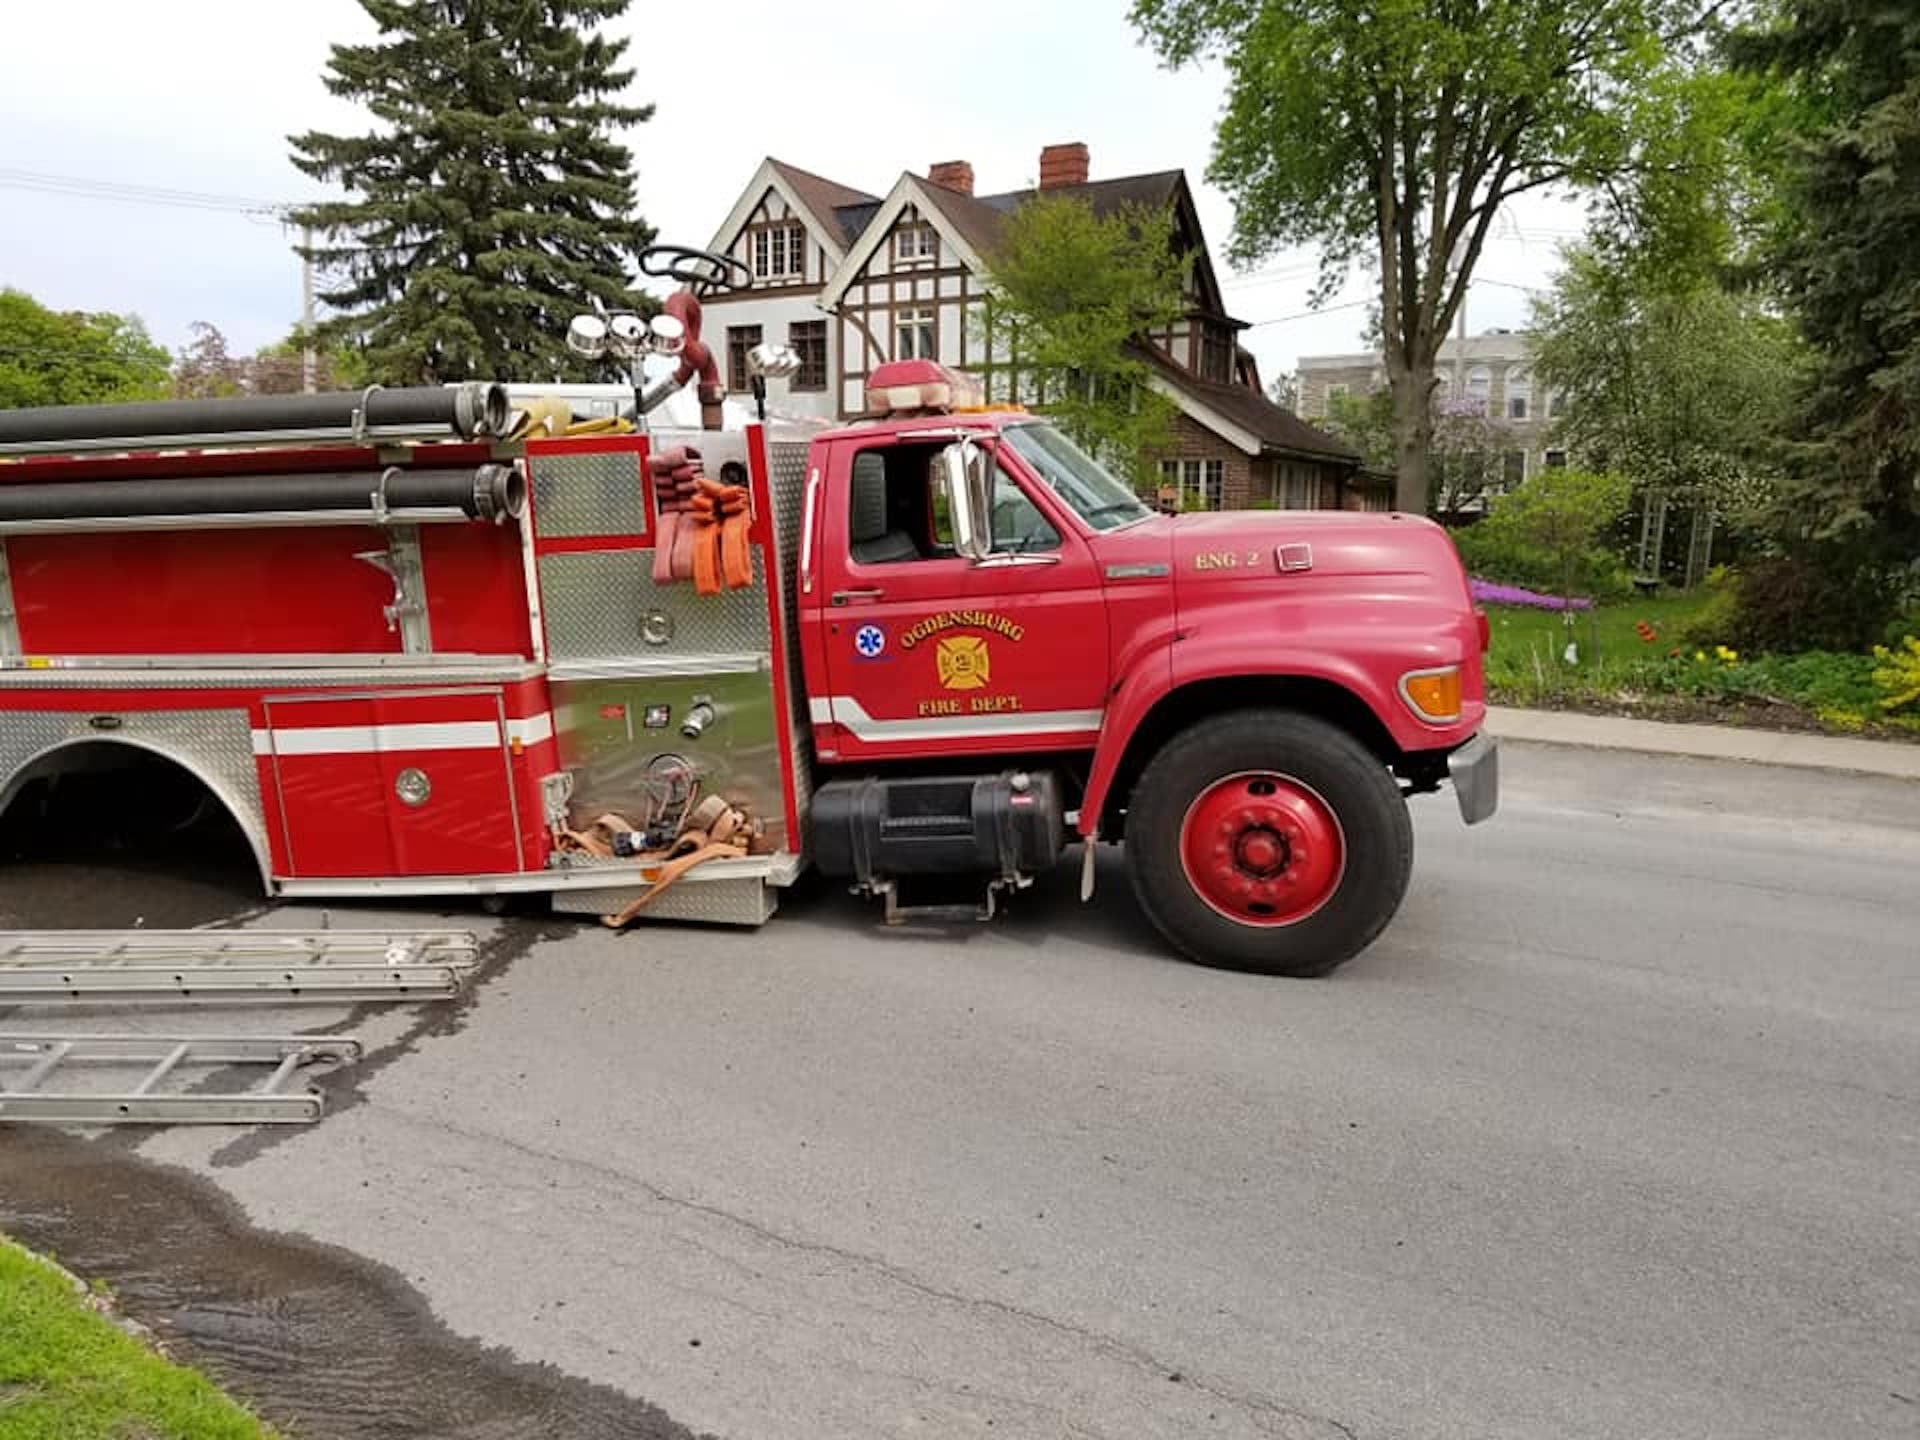 Fire Truck Axle Randomly Falls off While Responding to Meth Lab Emergency in Upstate New York